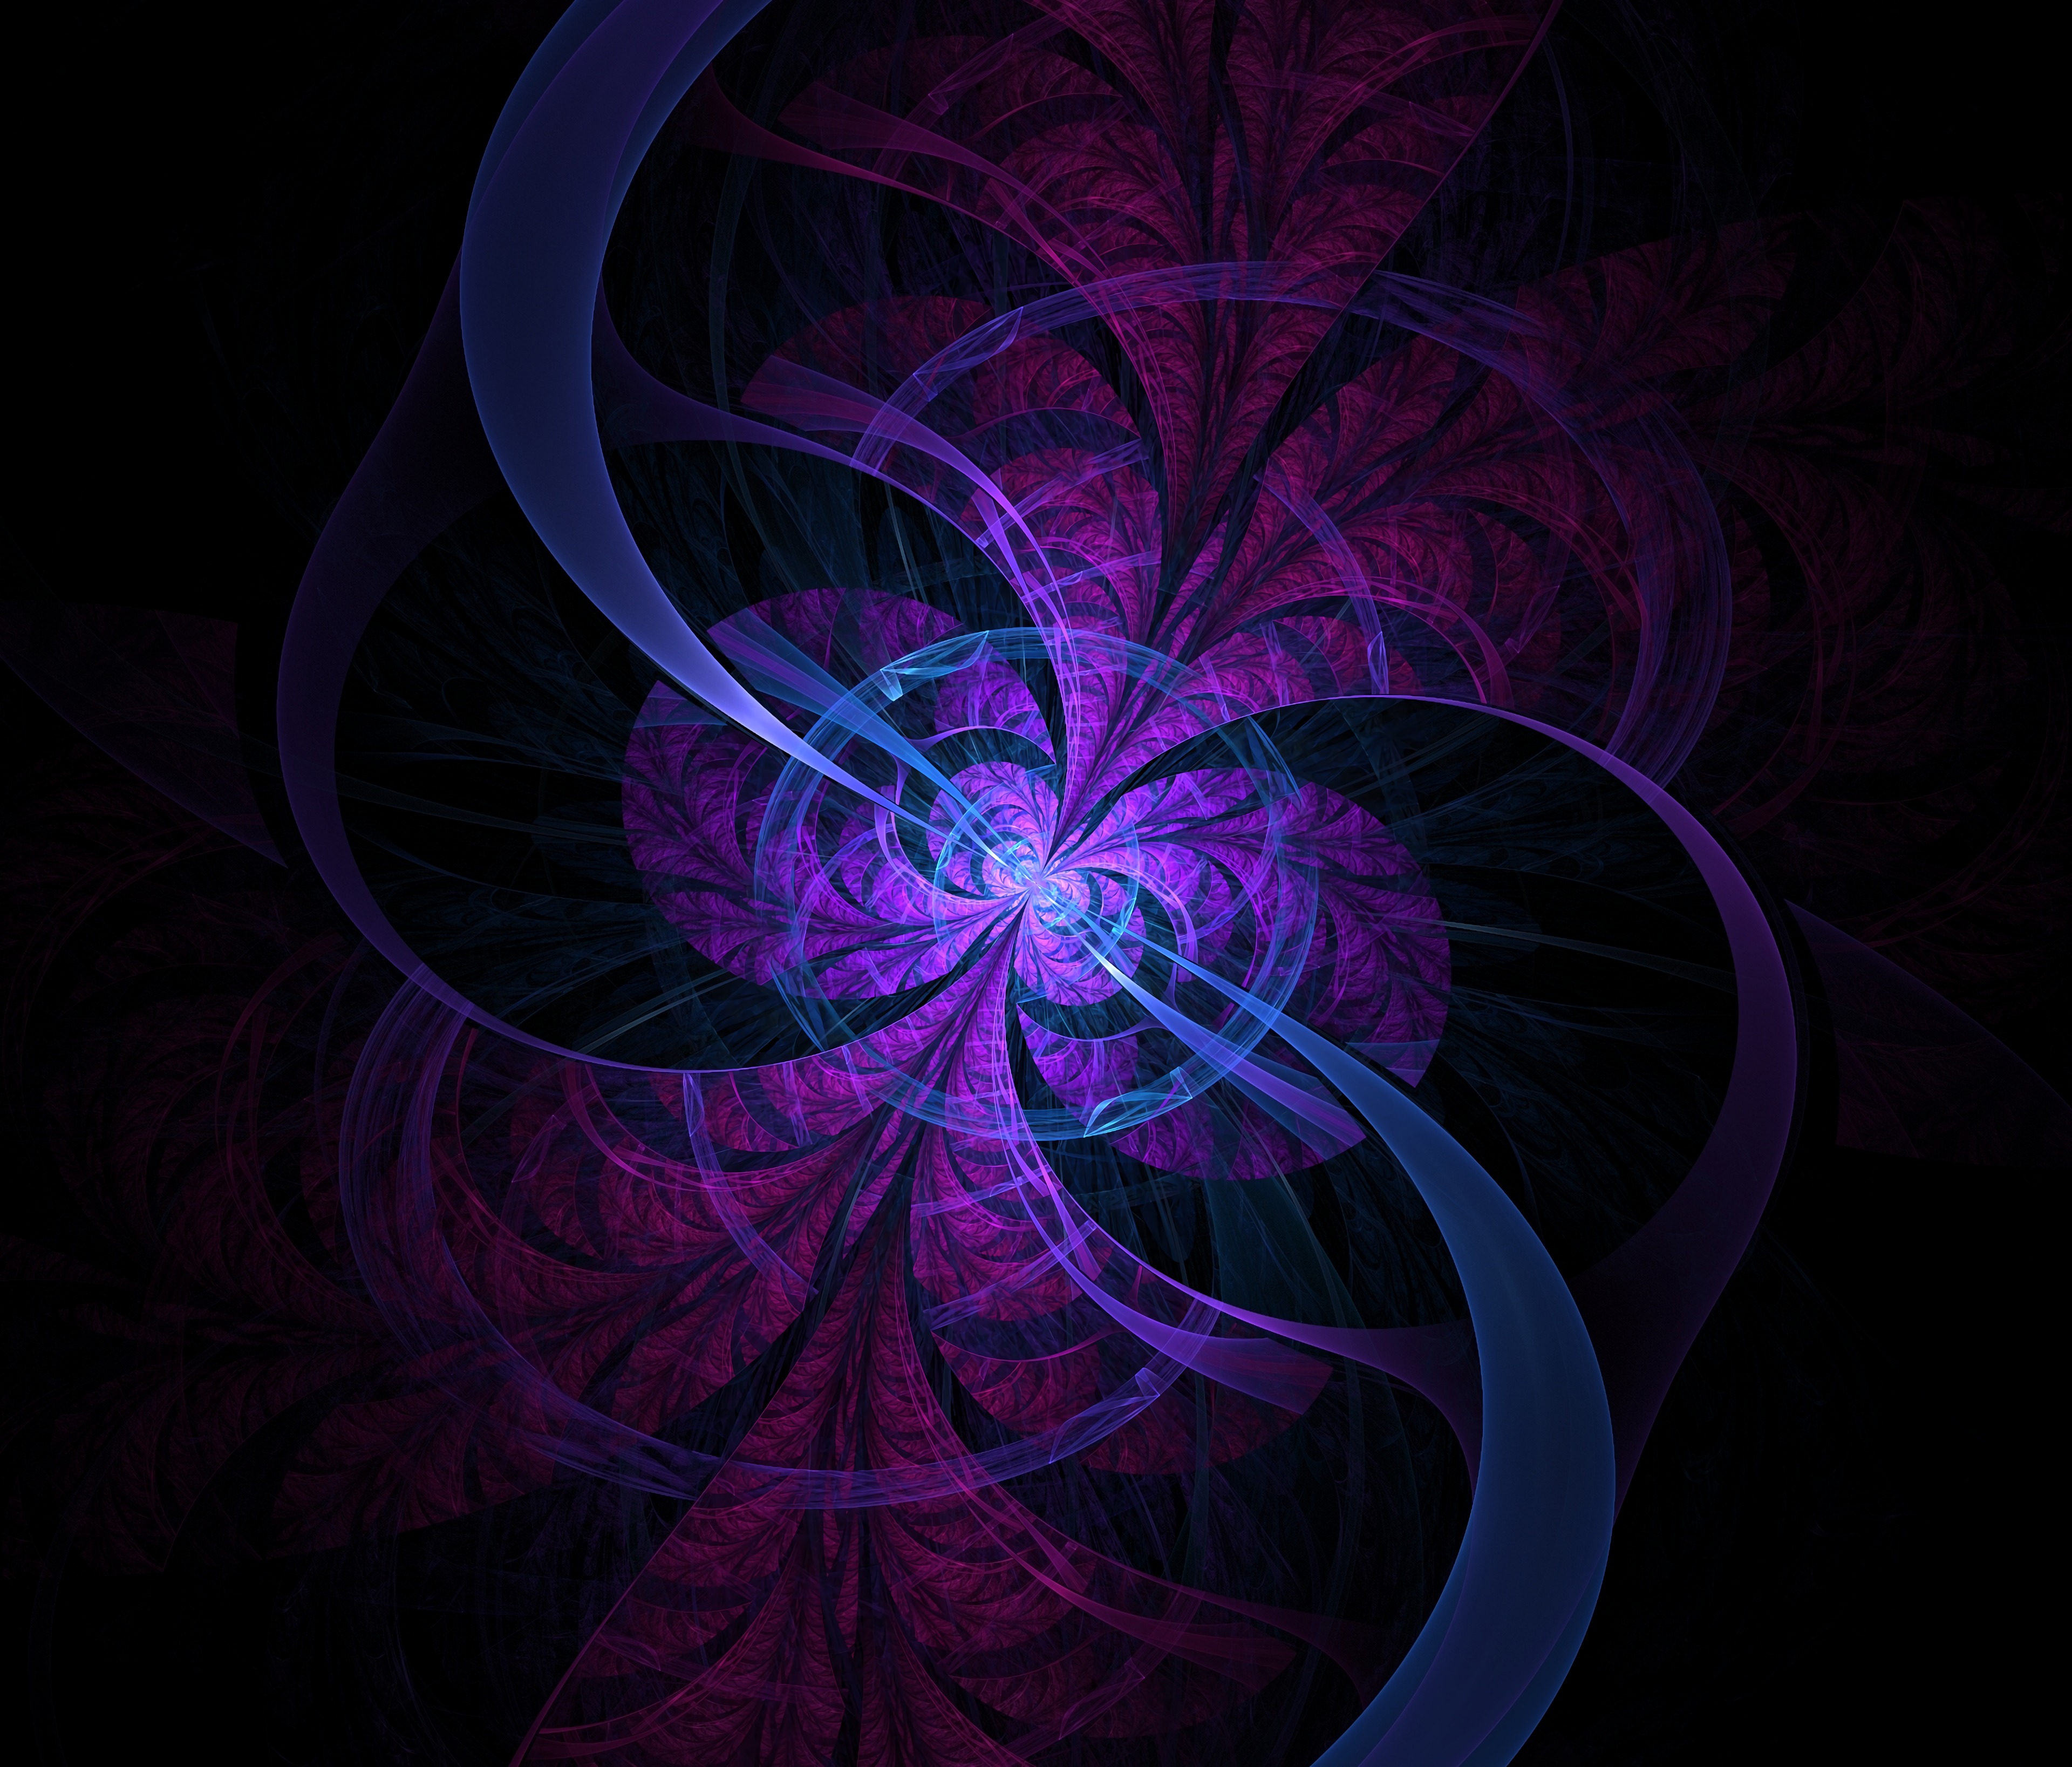 purple, abstract, dark, lines, violet, circles, fractal, dispersion, diffusion cell phone wallpapers